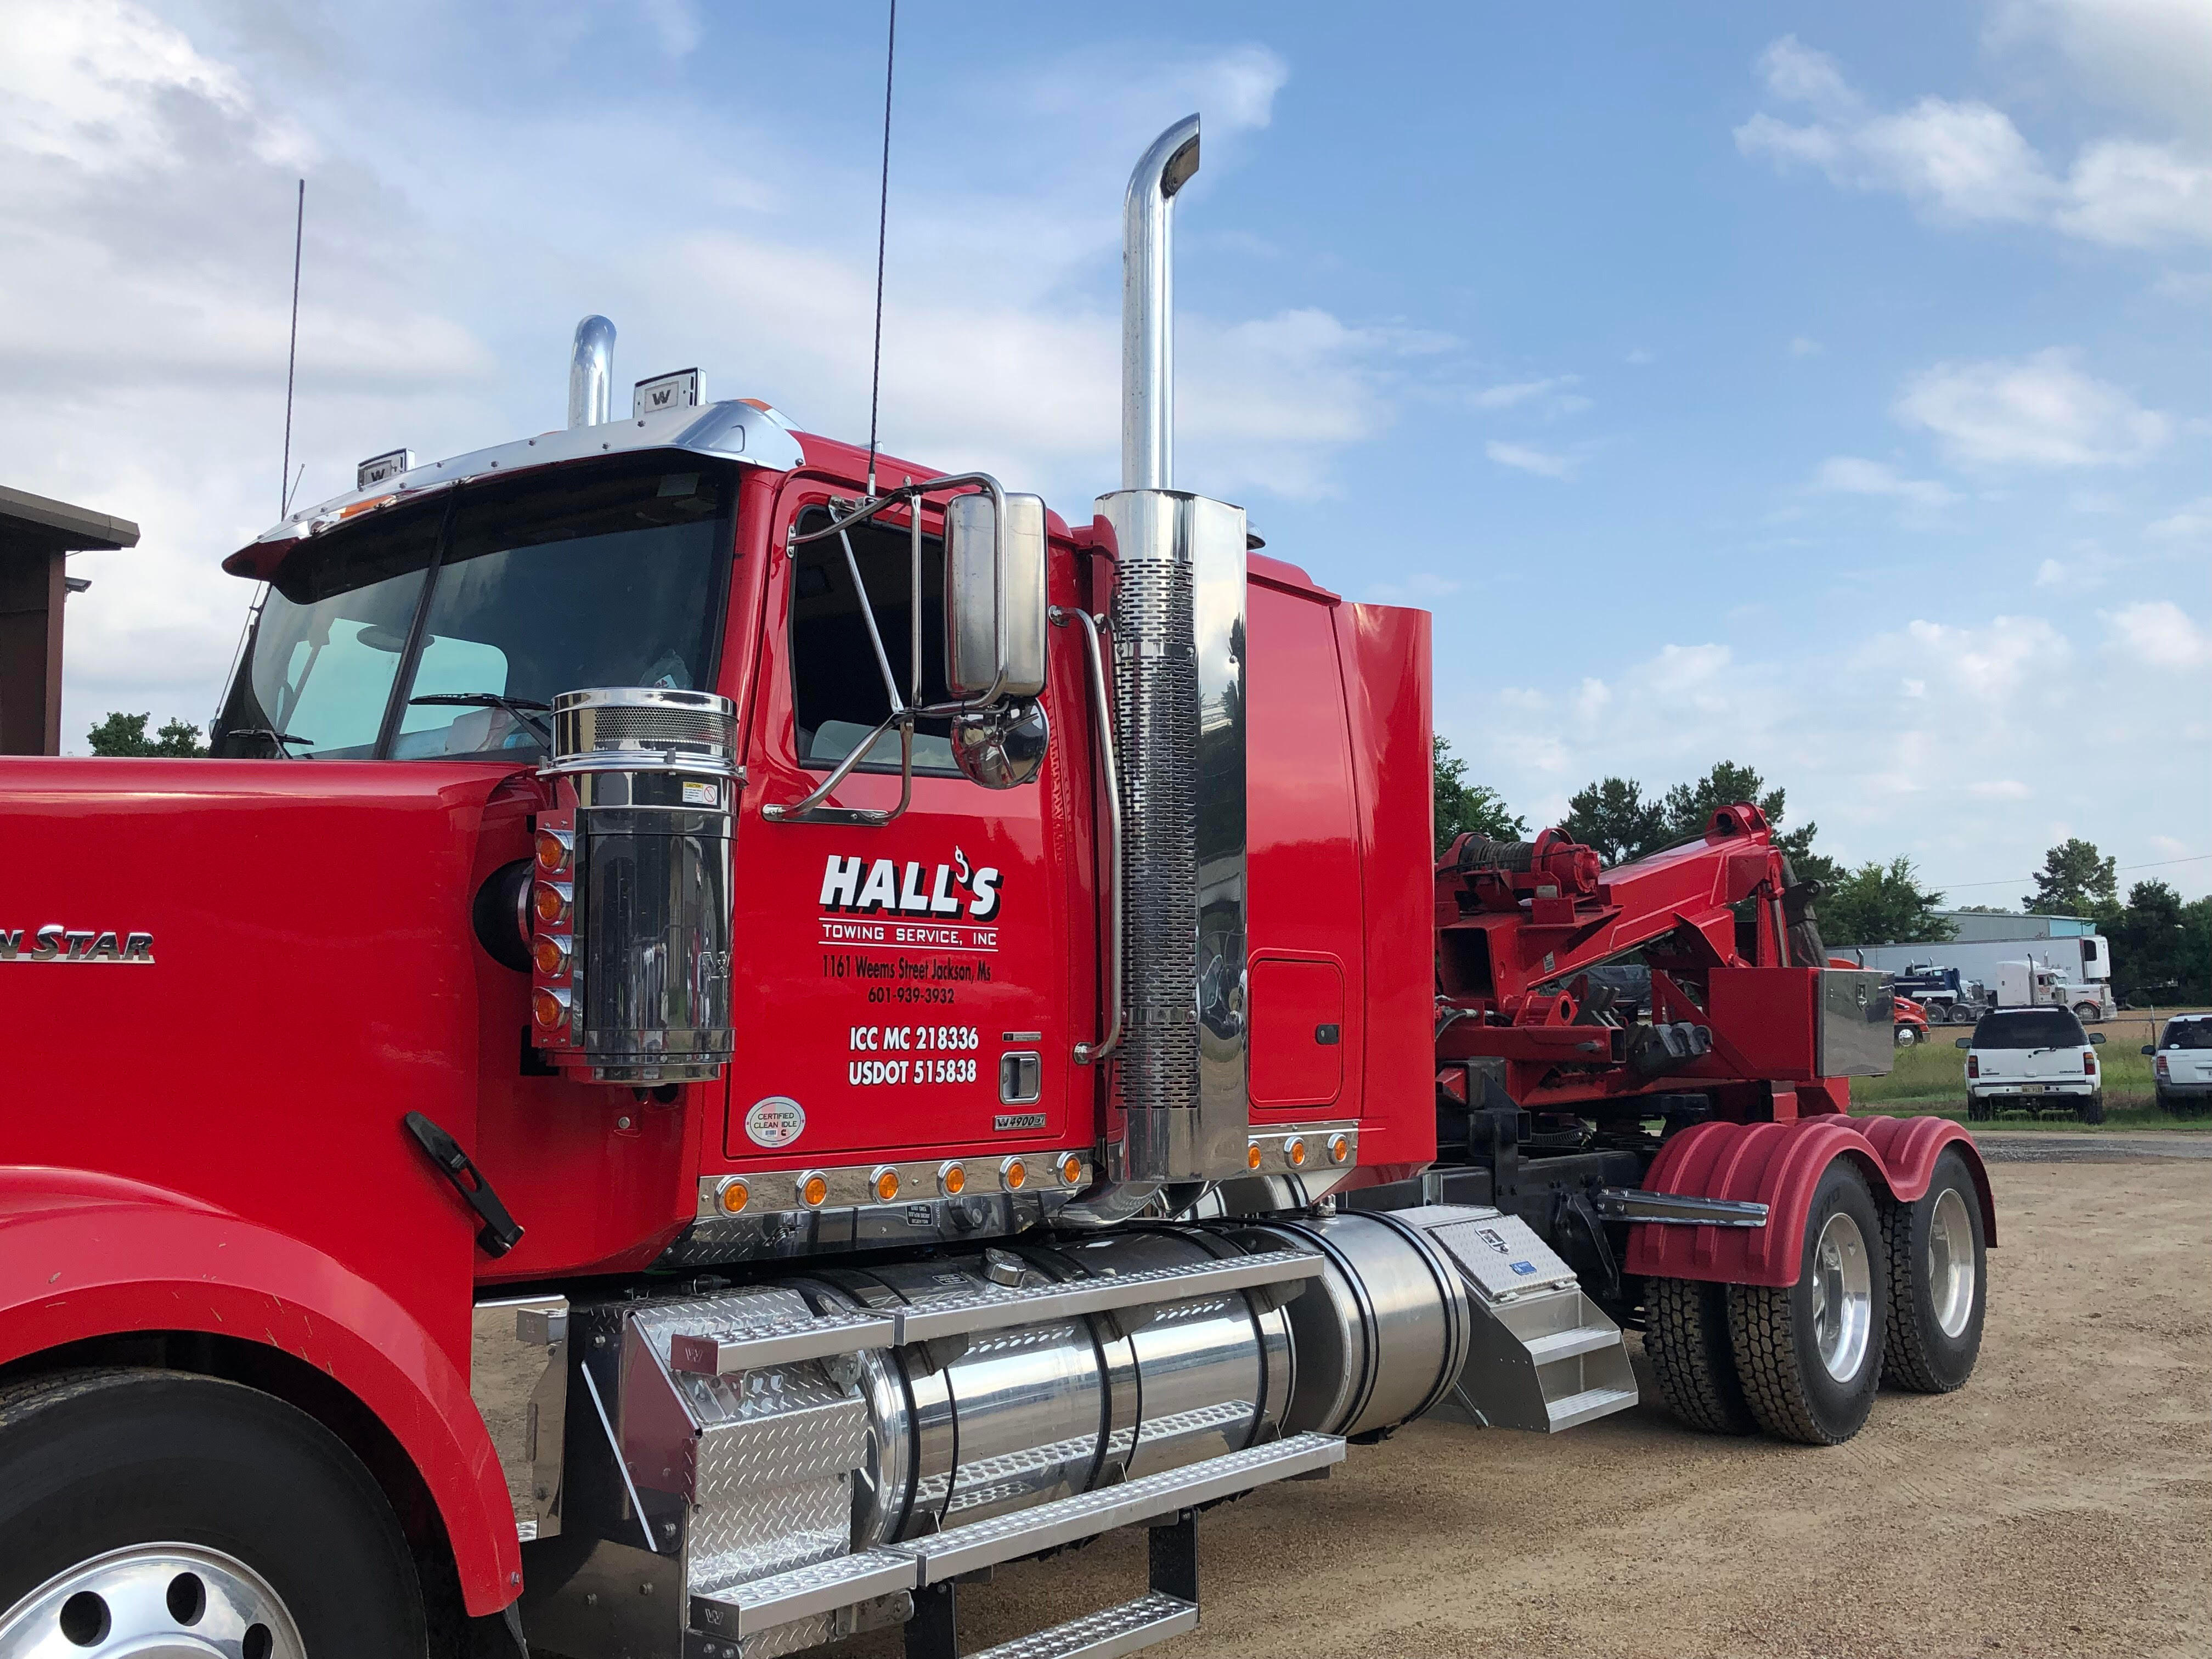 Hall's Towing Service Photo